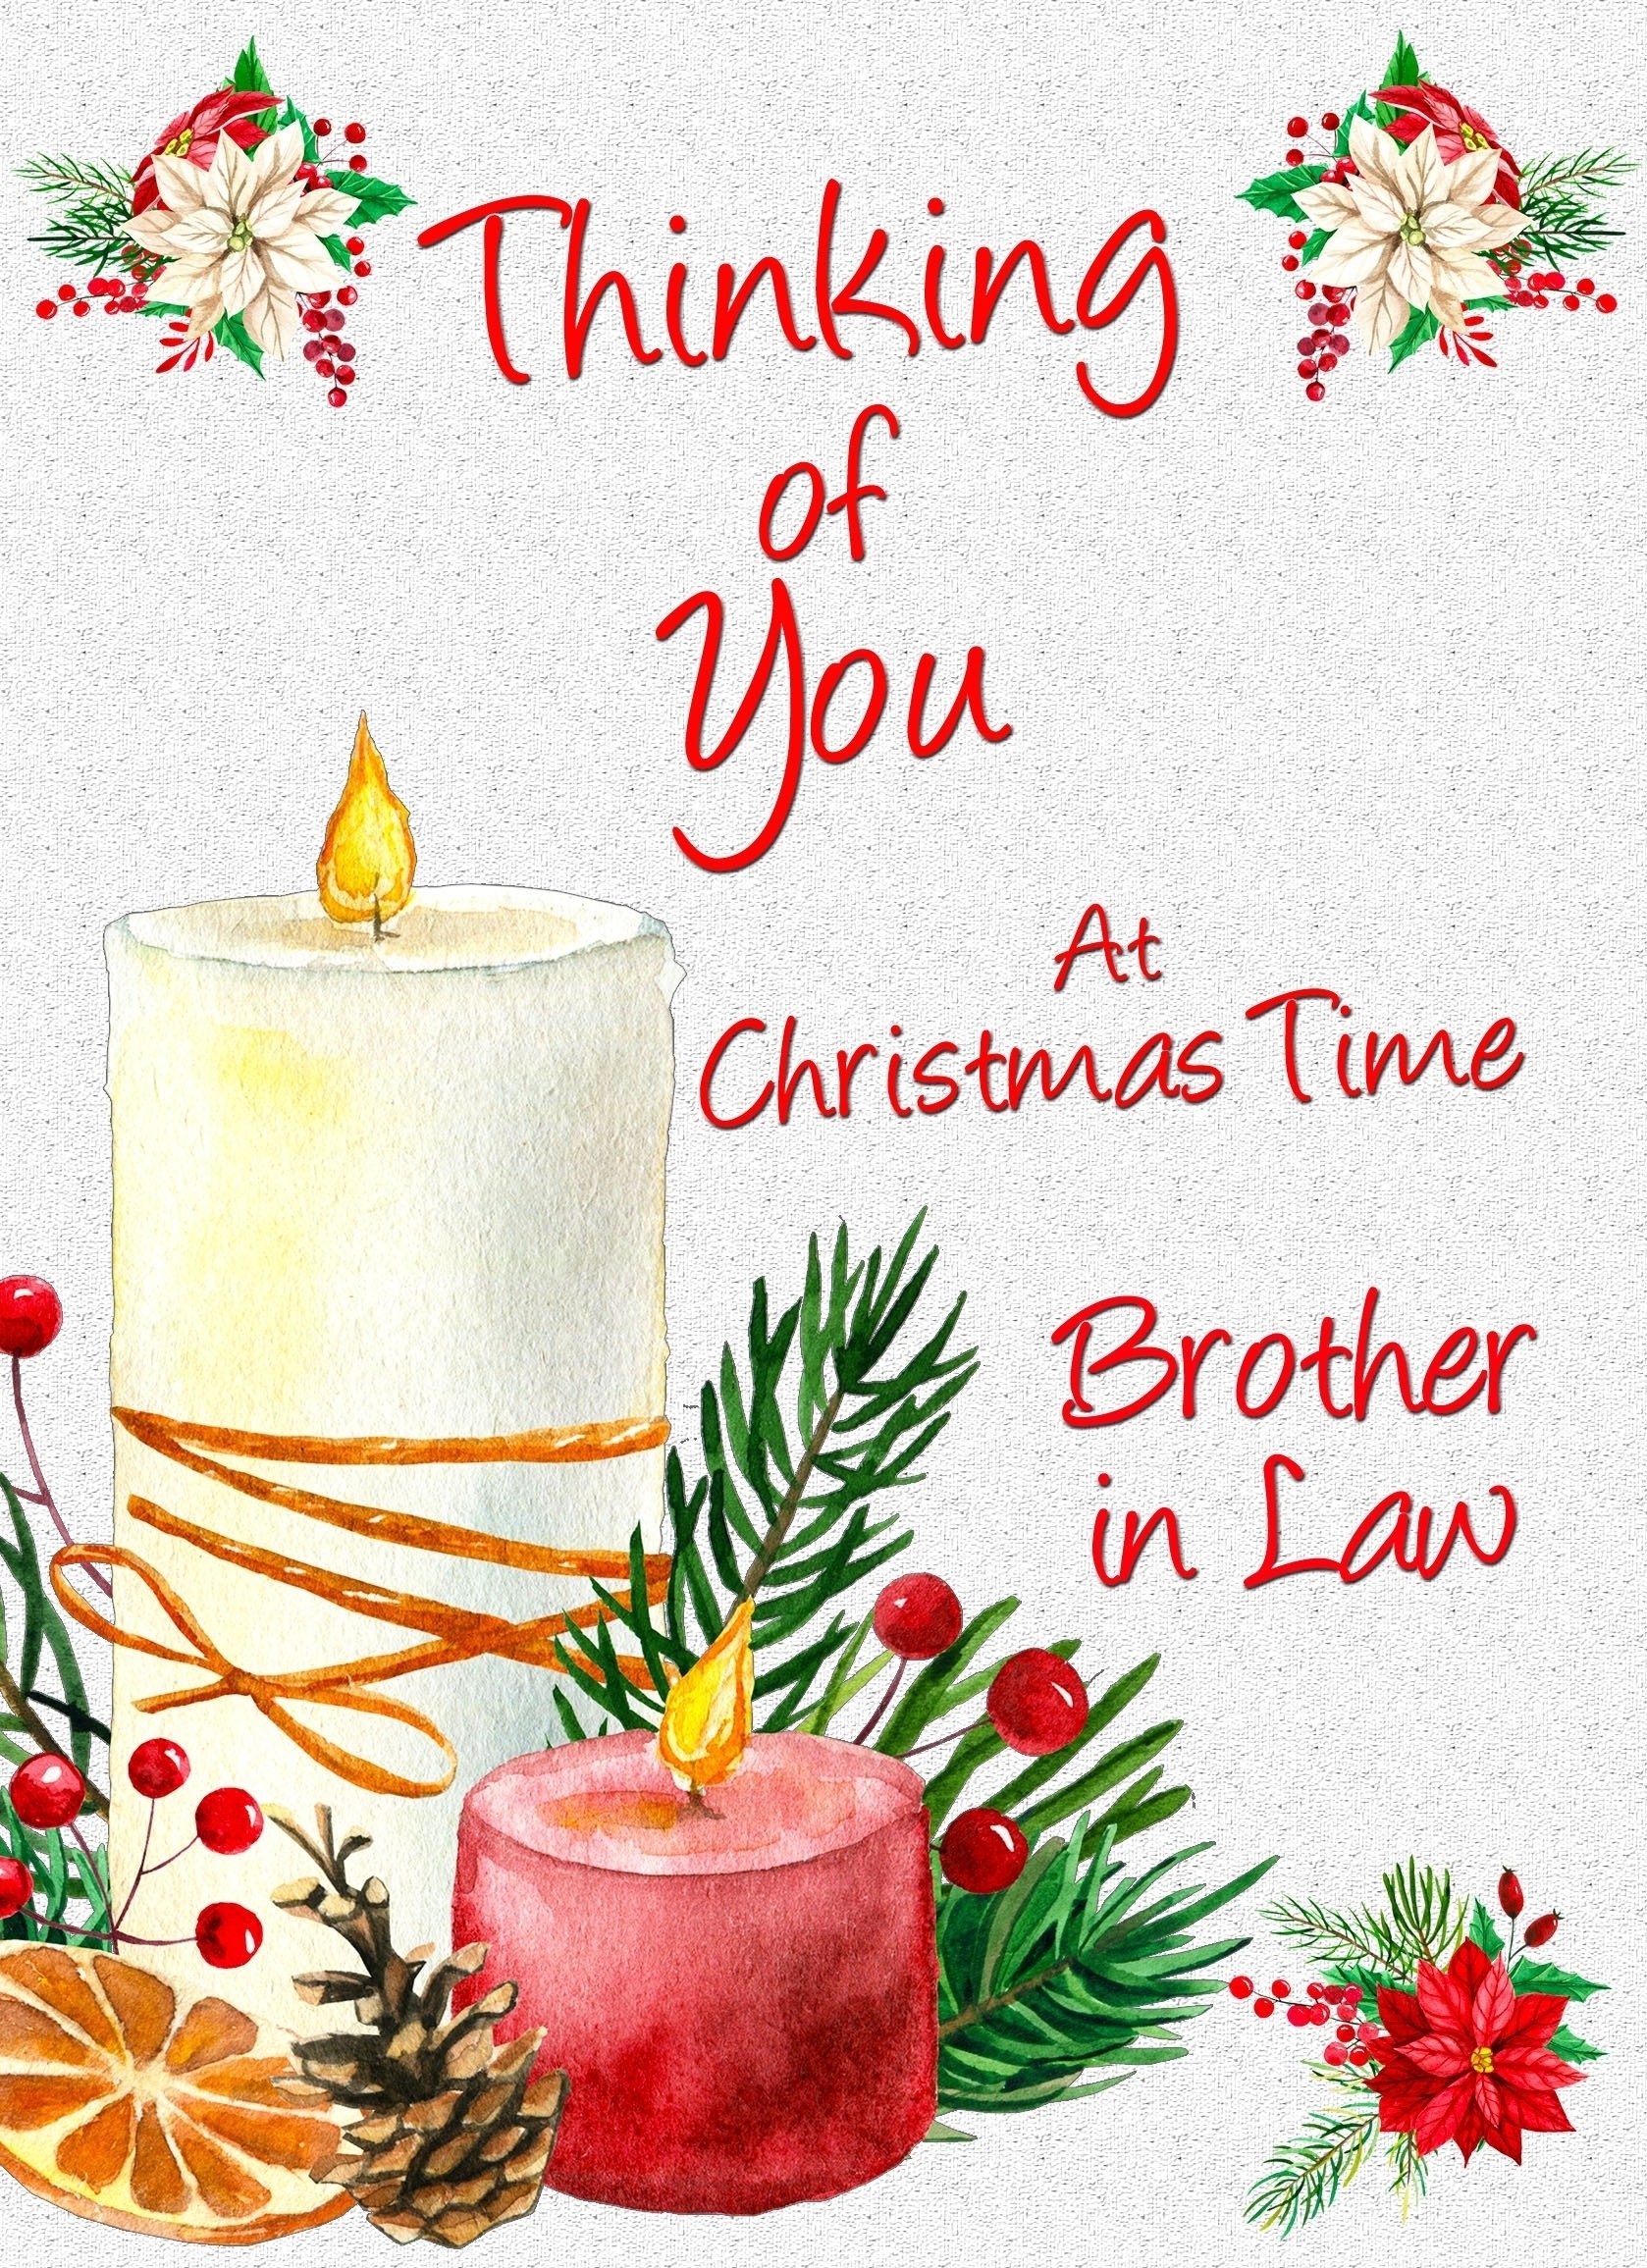 Thinking of You at Christmas Card For Brother in Law (Candle)